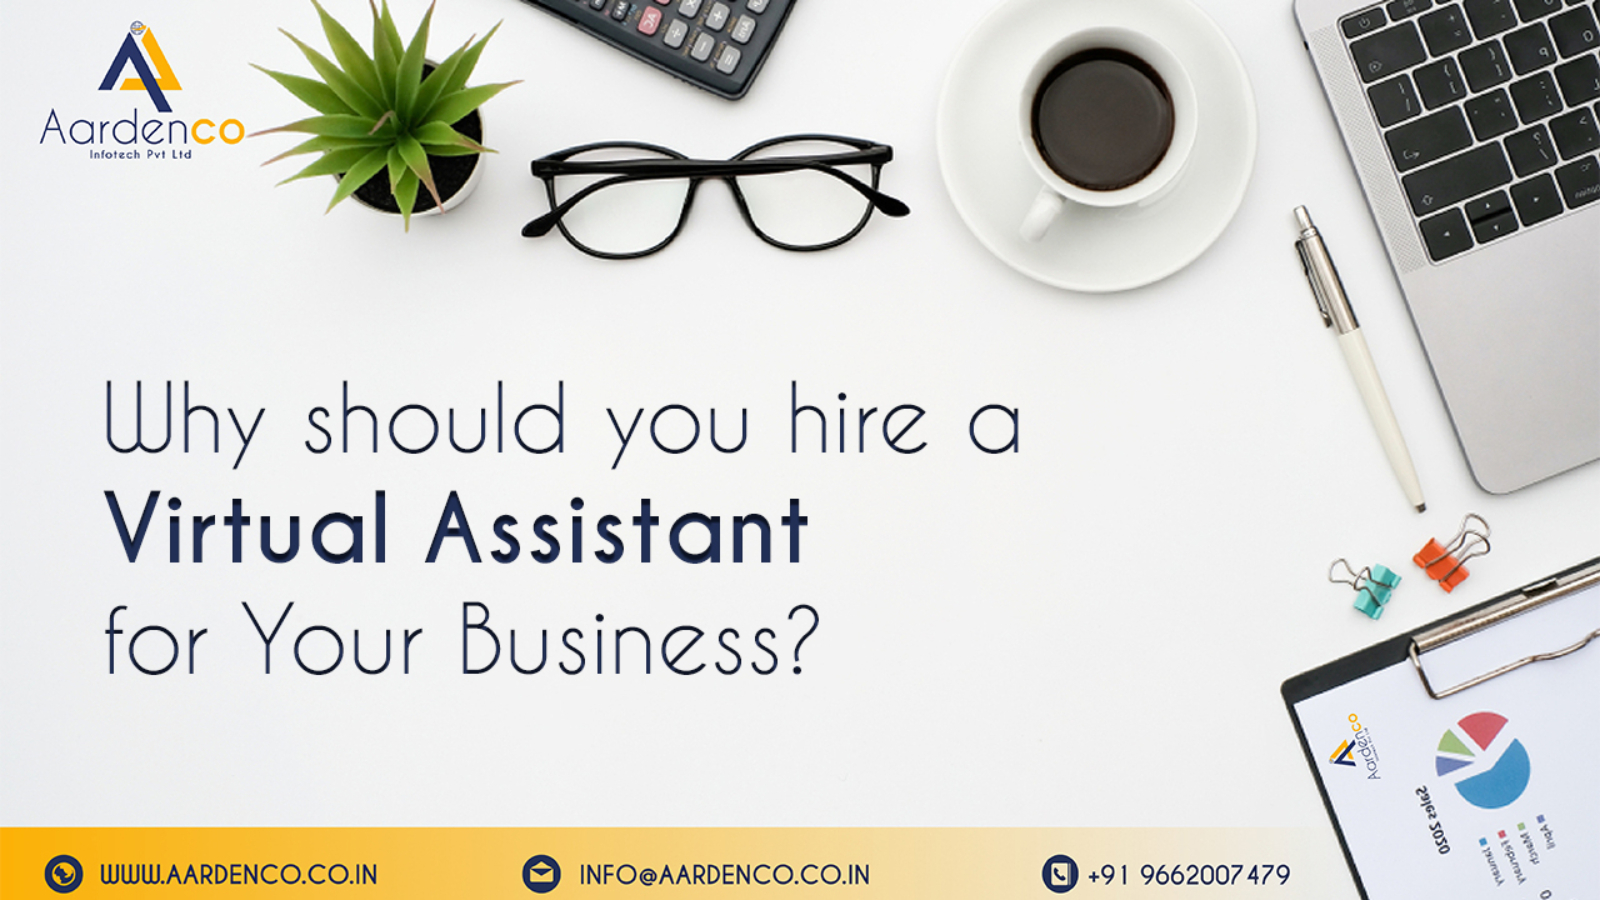 Why should you hire a Virtual Assistant for Your Business?